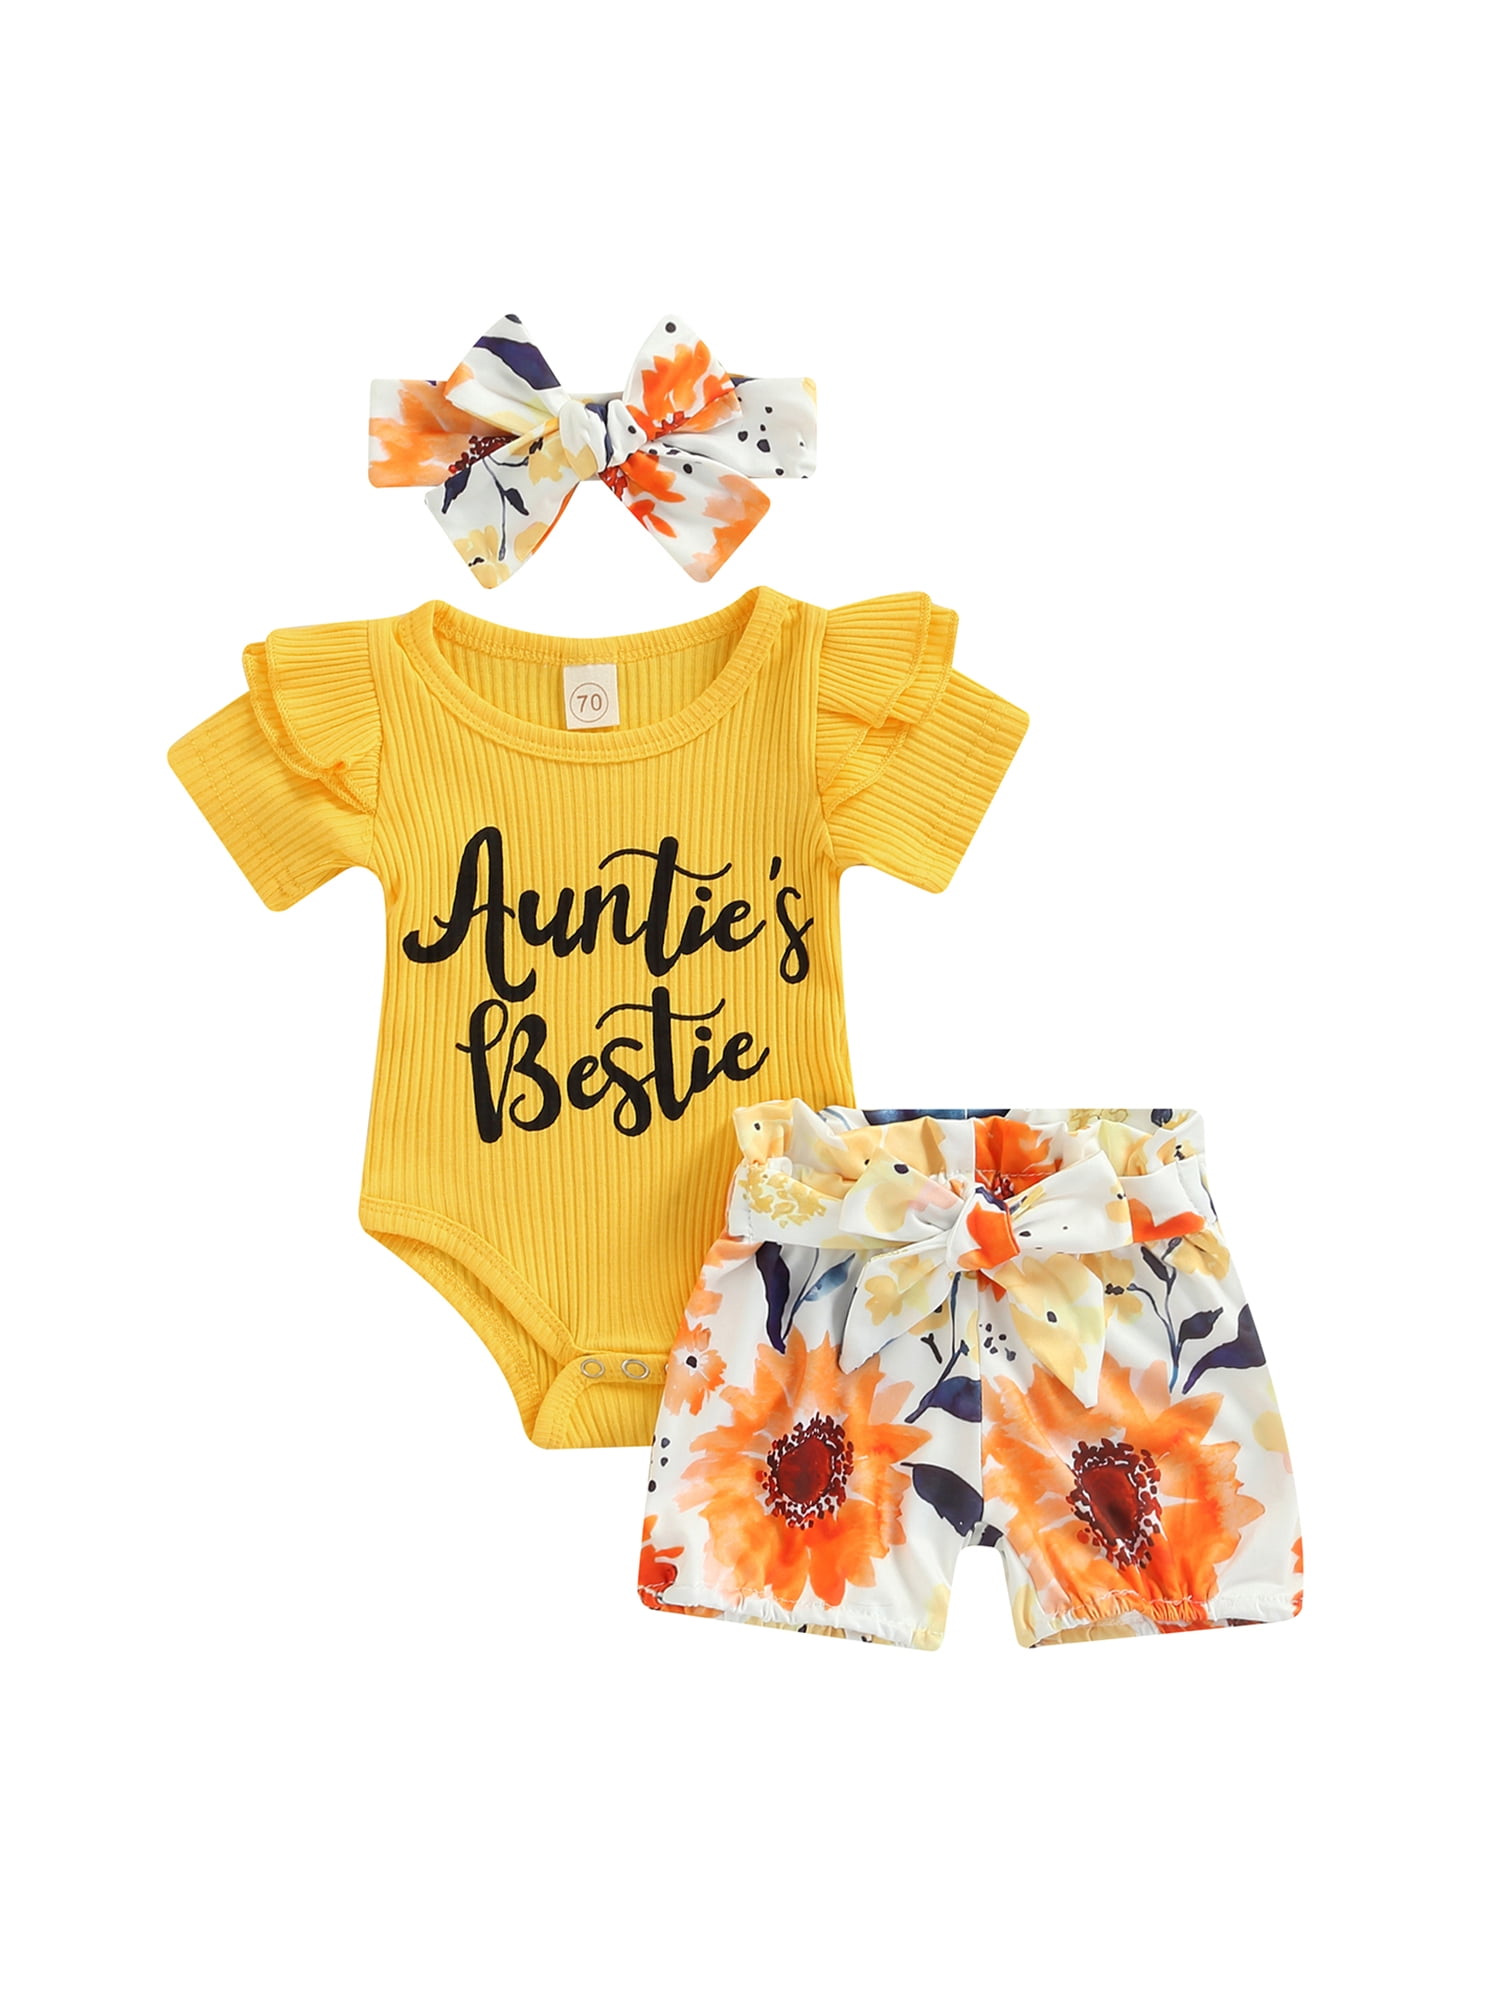 US Newborn Infant Baby Girl Clothes Short Sleeve Romper Shorts Casual Outfit Set 